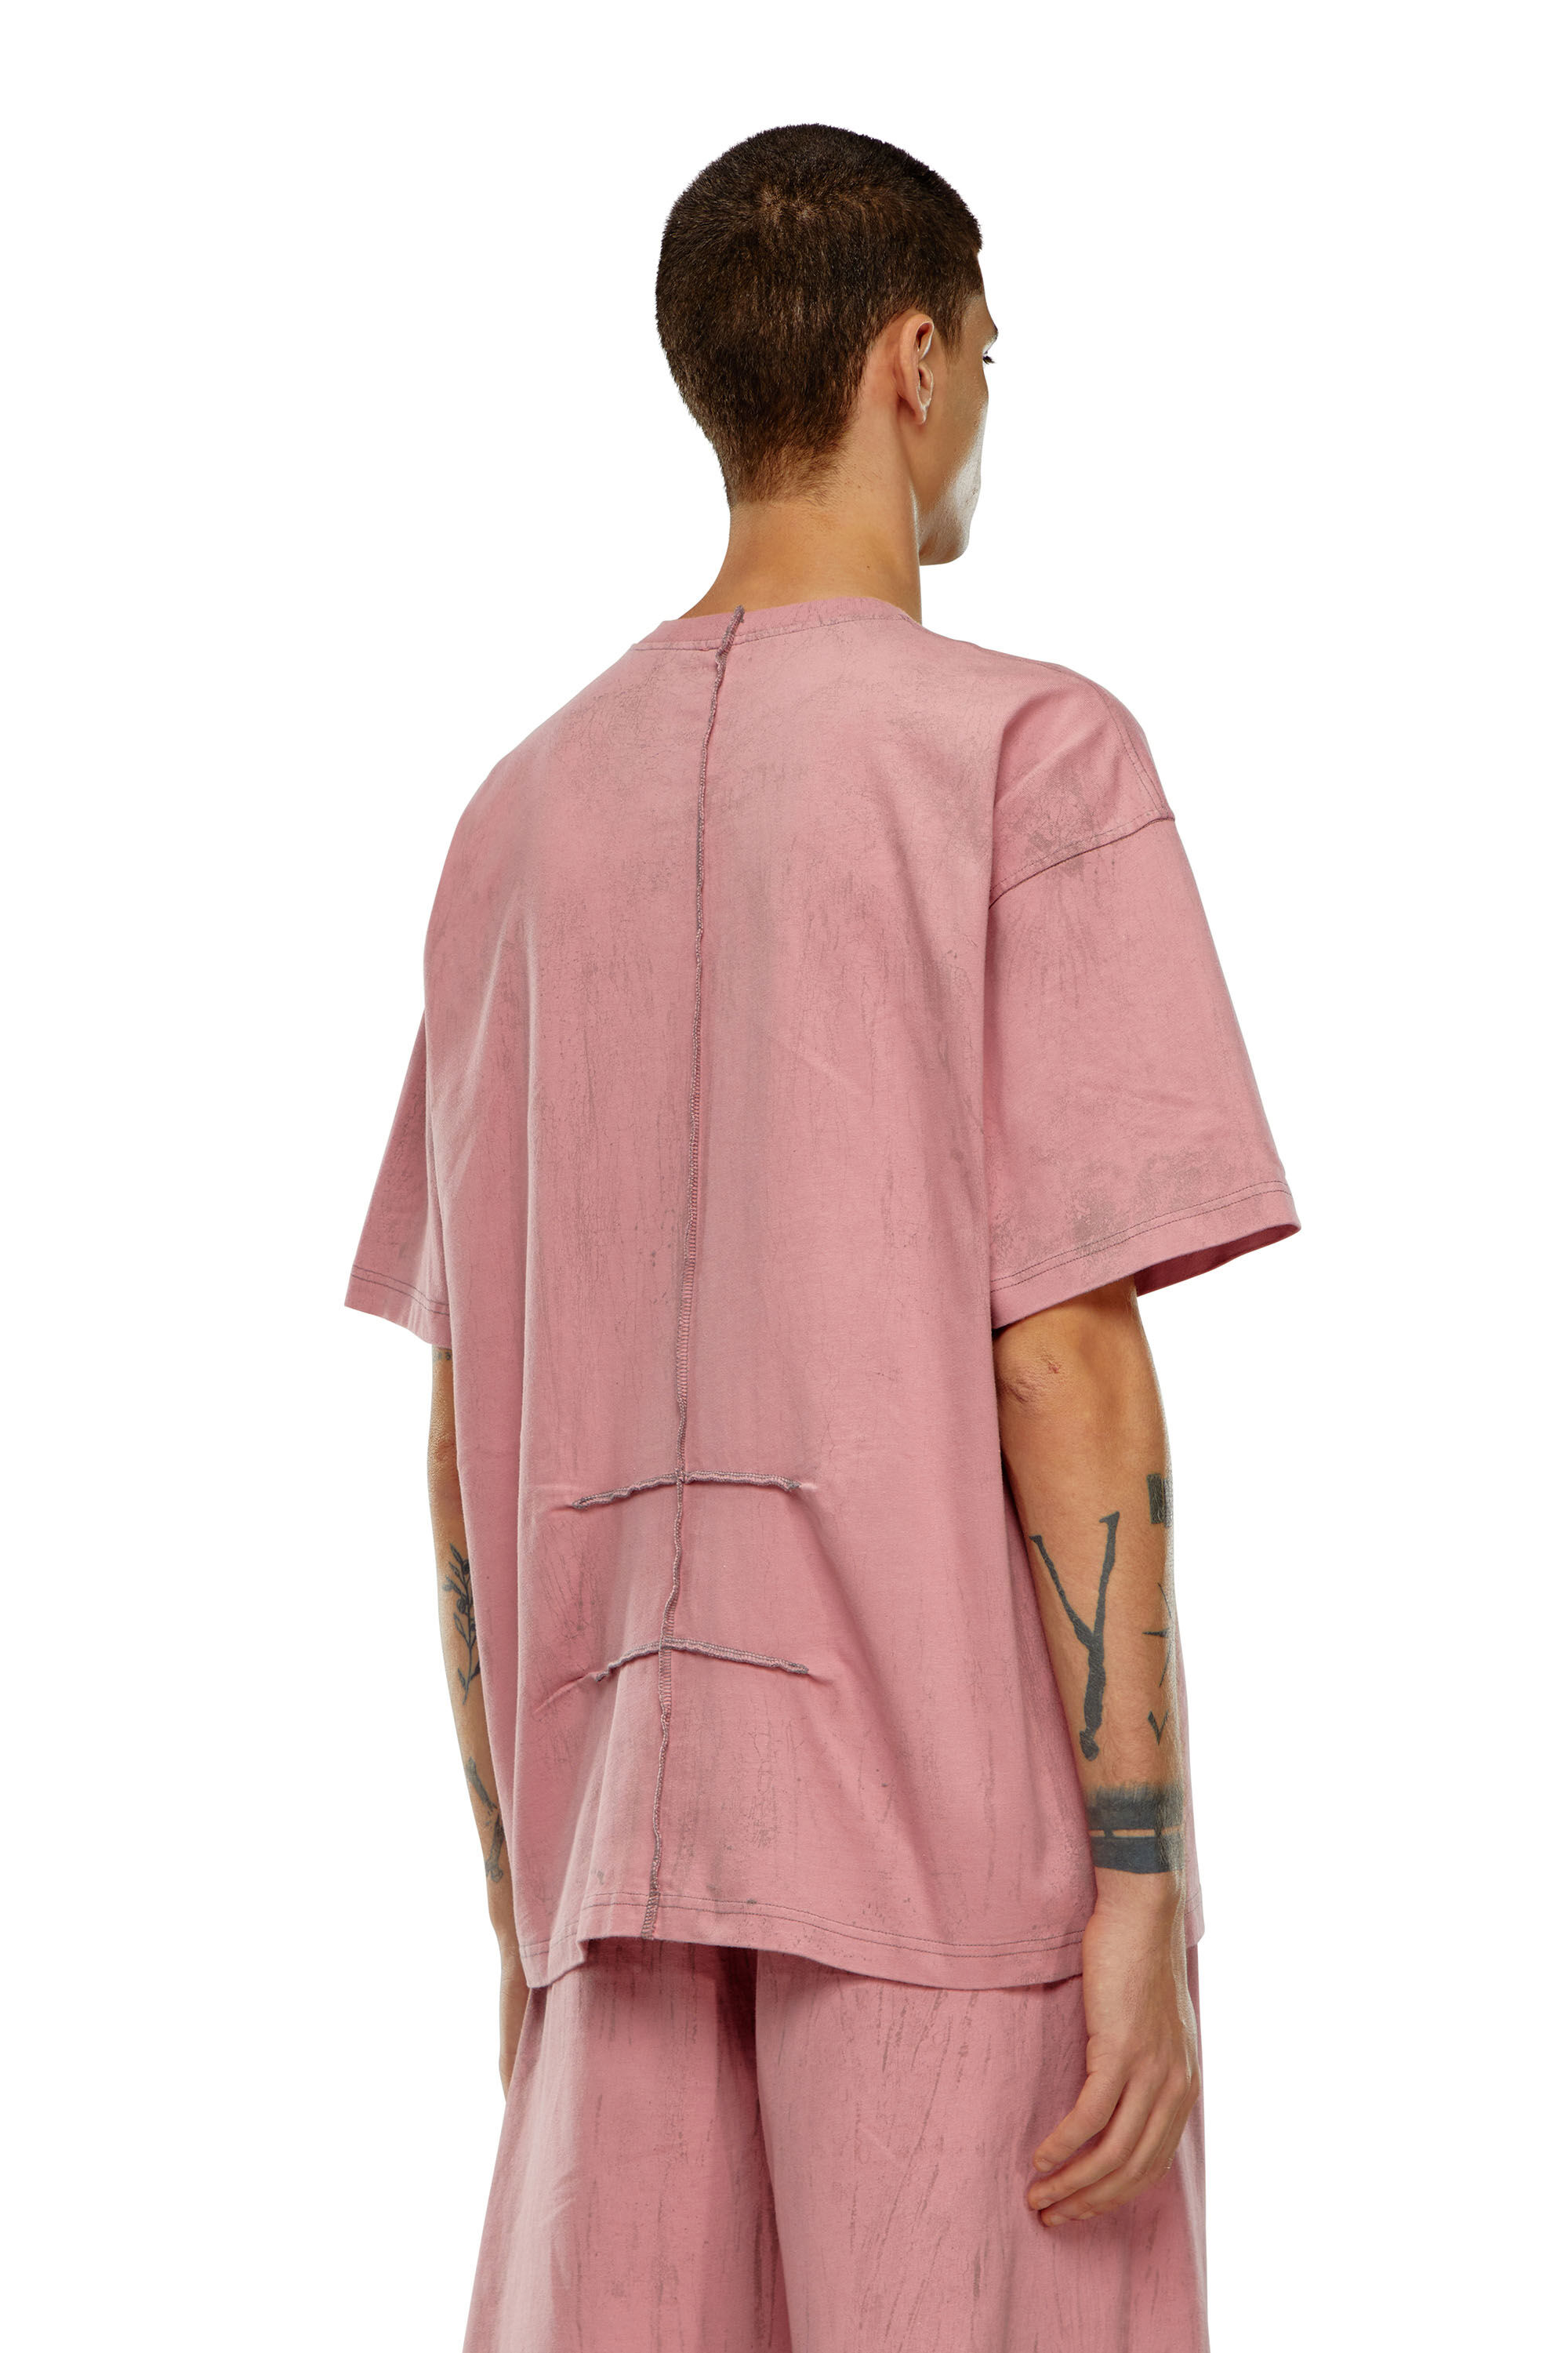 Diesel - T-COS, Uomo T-shirt in jersey effetto gesso in Rosa - Image 4